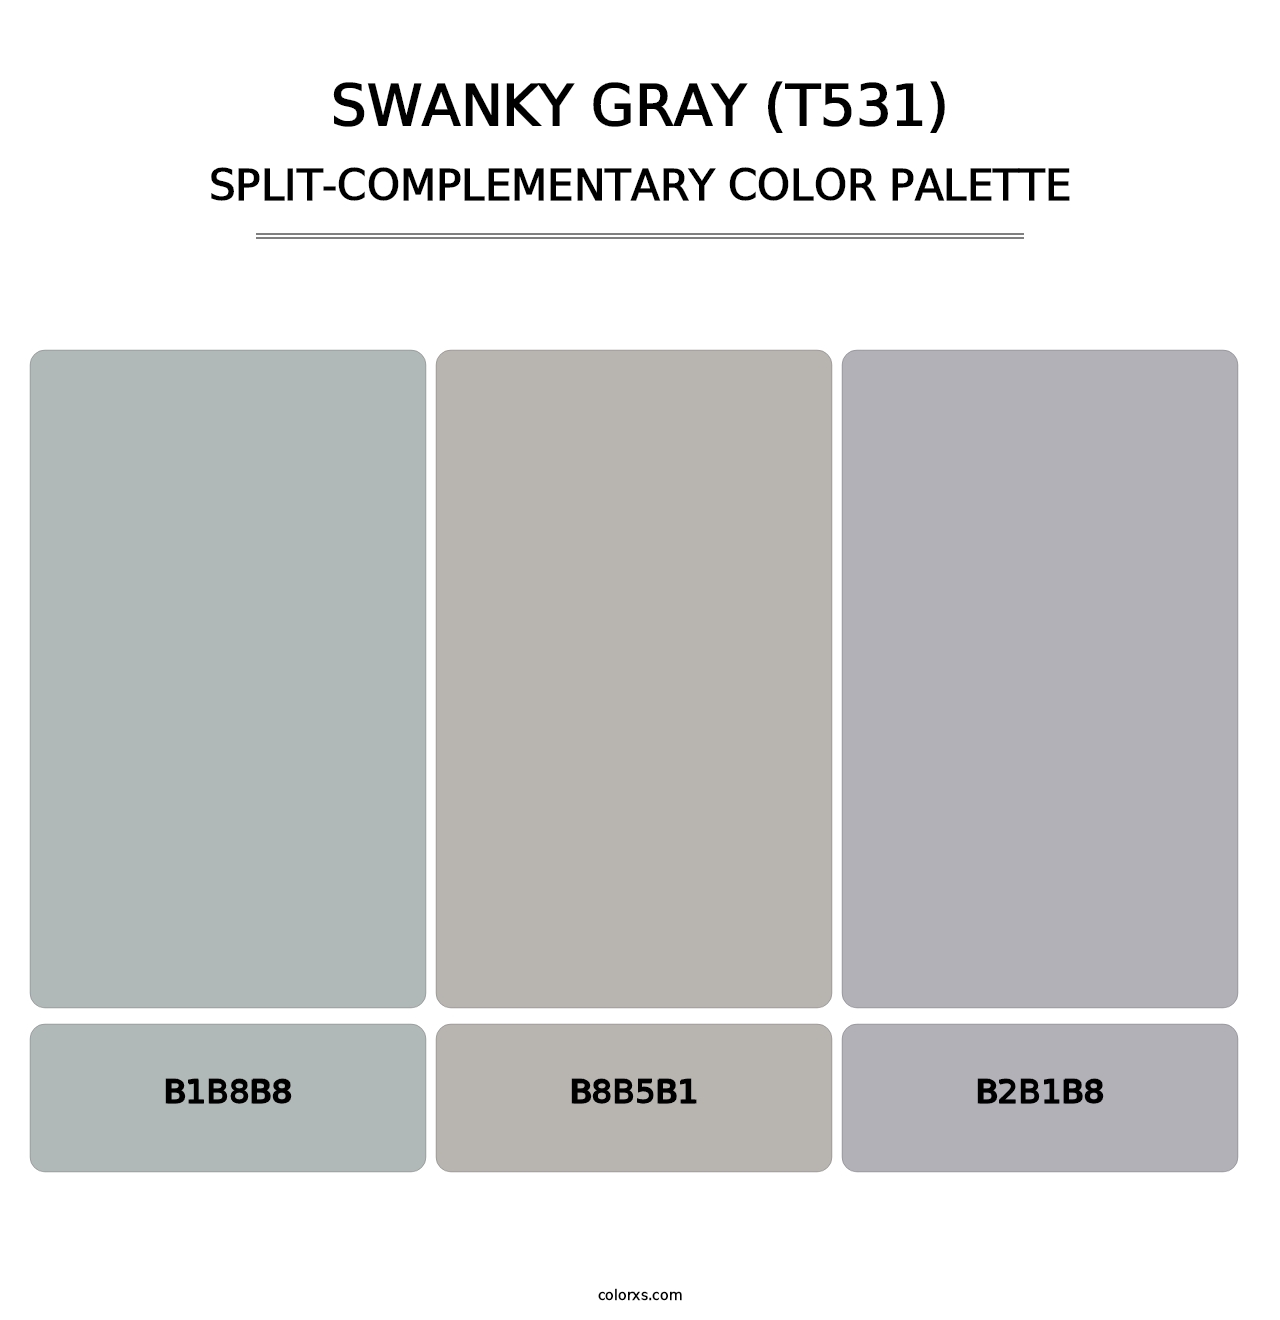 Swanky Gray (T531) - Split-Complementary Color Palette